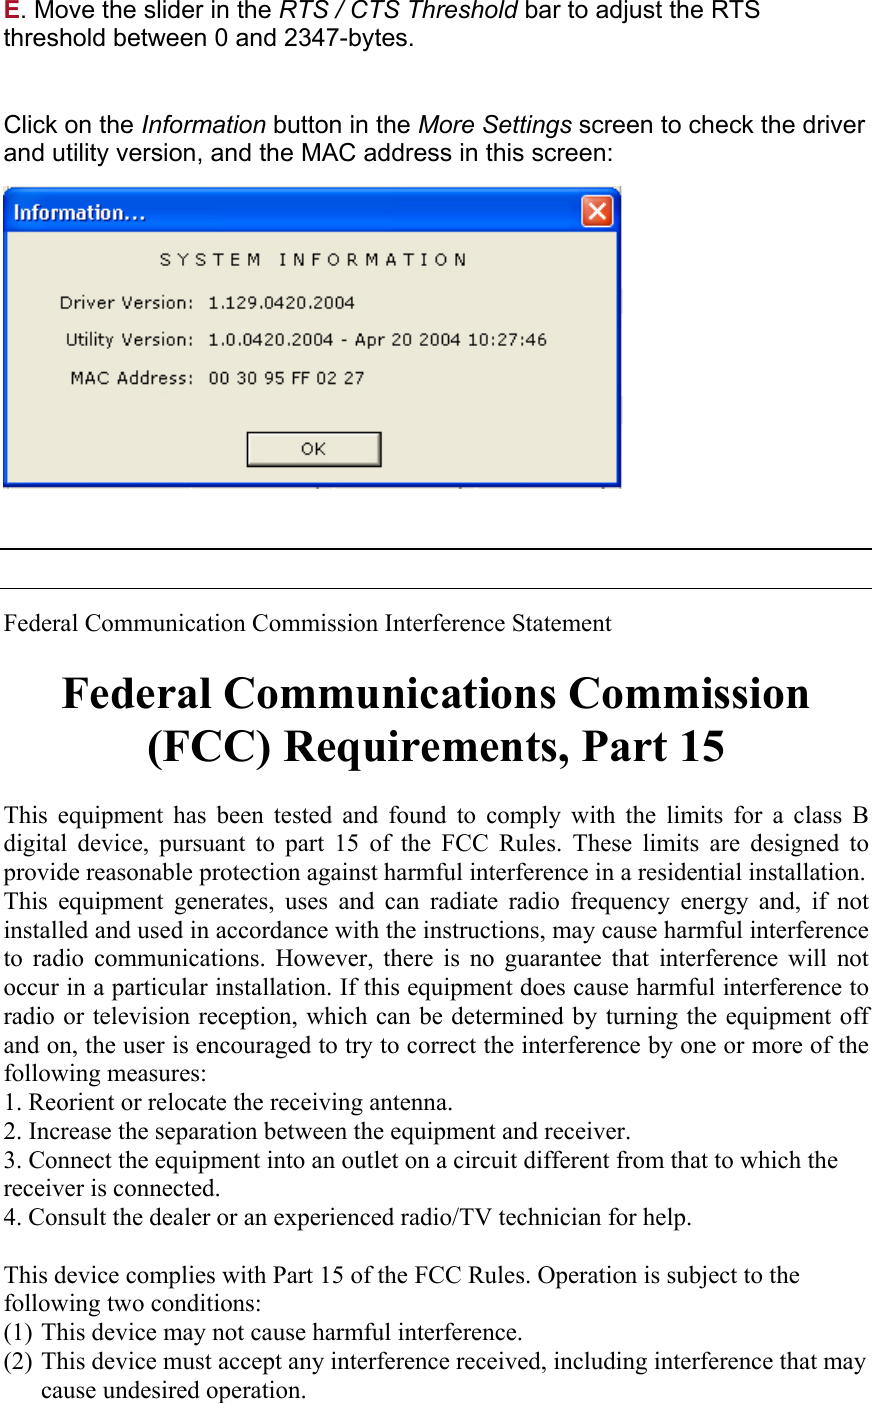 E. Move the slider in the RTS / CTS Threshold bar to adjust the RTS threshold between 0 and 2347-bytes.   Click on the Information button in the More Settings screen to check the driver and utility version, and the MAC address in this screen:         Federal Communication Commission Interference Statement  Federal Communications Commission (FCC) Requirements, Part 15  This equipment has been tested and found to comply with the limits for a class B digital device, pursuant to part 15 of the FCC Rules. These limits are designed to provide reasonable protection against harmful interference in a residential installation.  This equipment generates, uses and can radiate radio frequency energy and, if not installed and used in accordance with the instructions, may cause harmful interference to radio communications. However, there is no guarantee that interference will not occur in a particular installation. If this equipment does cause harmful interference to radio or television reception, which can be determined by turning the equipment off and on, the user is encouraged to try to correct the interference by one or more of the following measures:  1. Reorient or relocate the receiving antenna. 2. Increase the separation between the equipment and receiver. 3. Connect the equipment into an outlet on a circuit different from that to which the receiver is connected. 4. Consult the dealer or an experienced radio/TV technician for help.  This device complies with Part 15 of the FCC Rules. Operation is subject to the following two conditions: (1) This device may not cause harmful interference. (2) This device must accept any interference received, including interference that may cause undesired operation.  